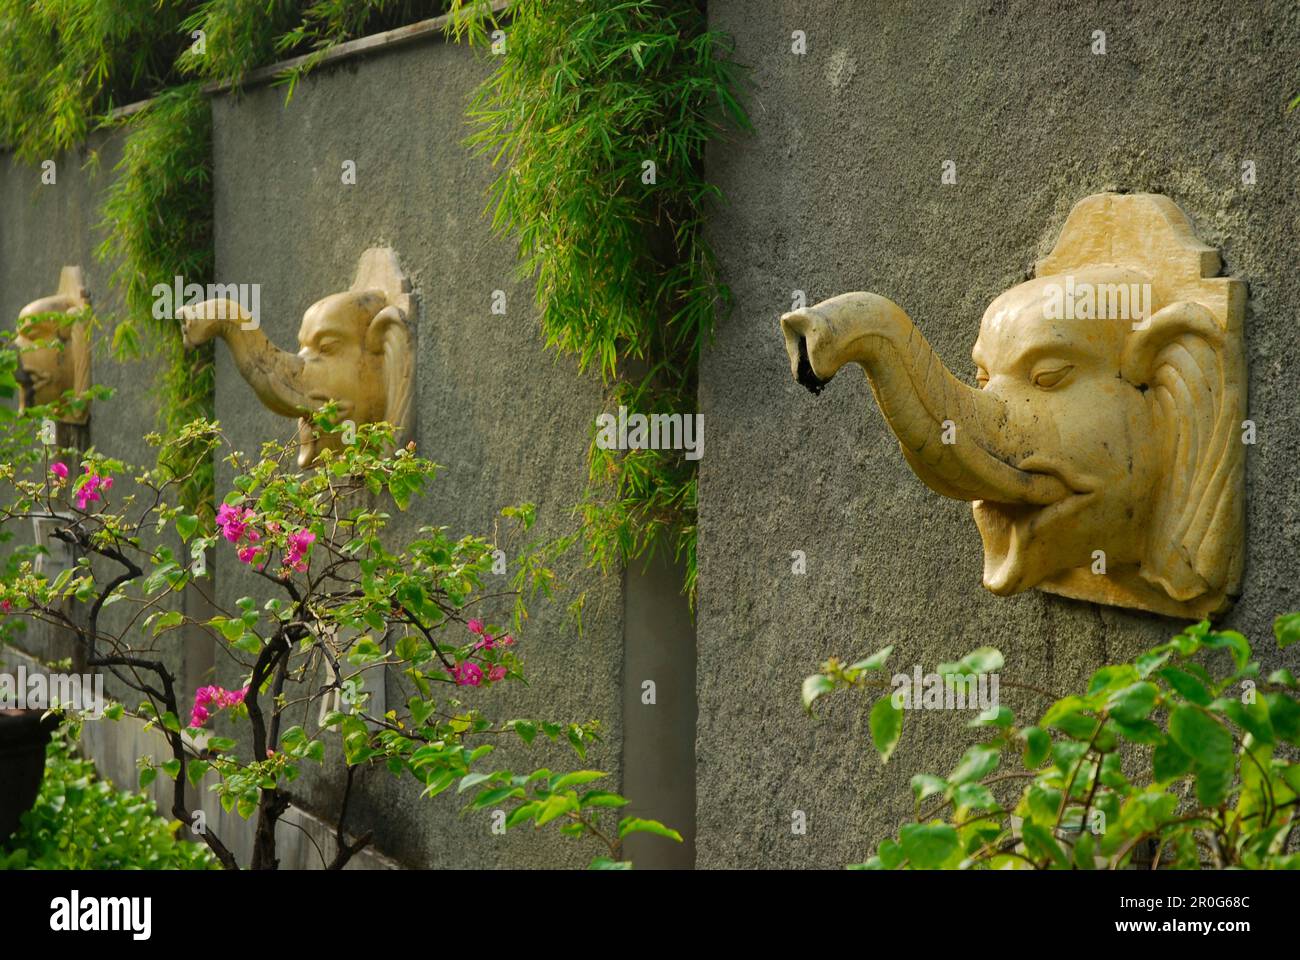 Wall with sculptures at the garden of Alam Kulkul Hotel, Kuta, Bali, Indonesia, Asia Stock Photo